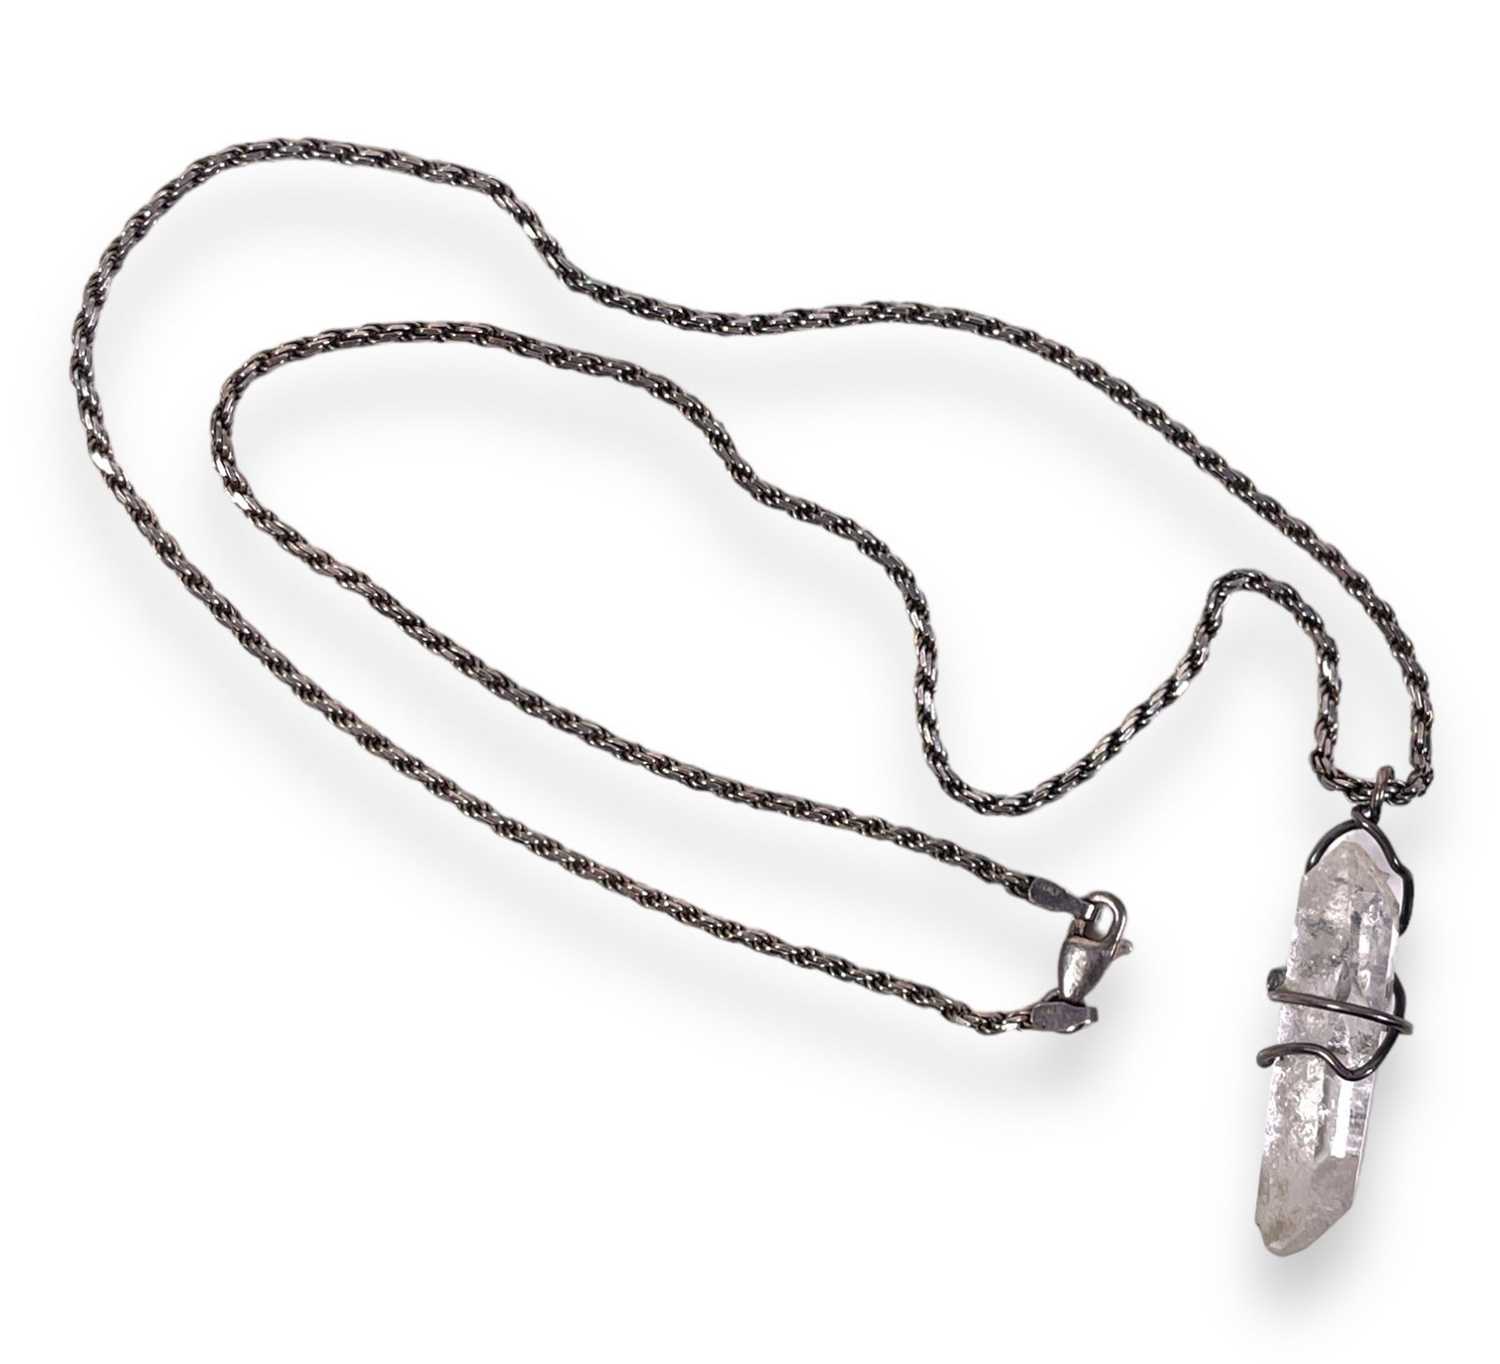 JIMI HENDRIX - OWNED AND WORN QUARTZ NECKLACE.